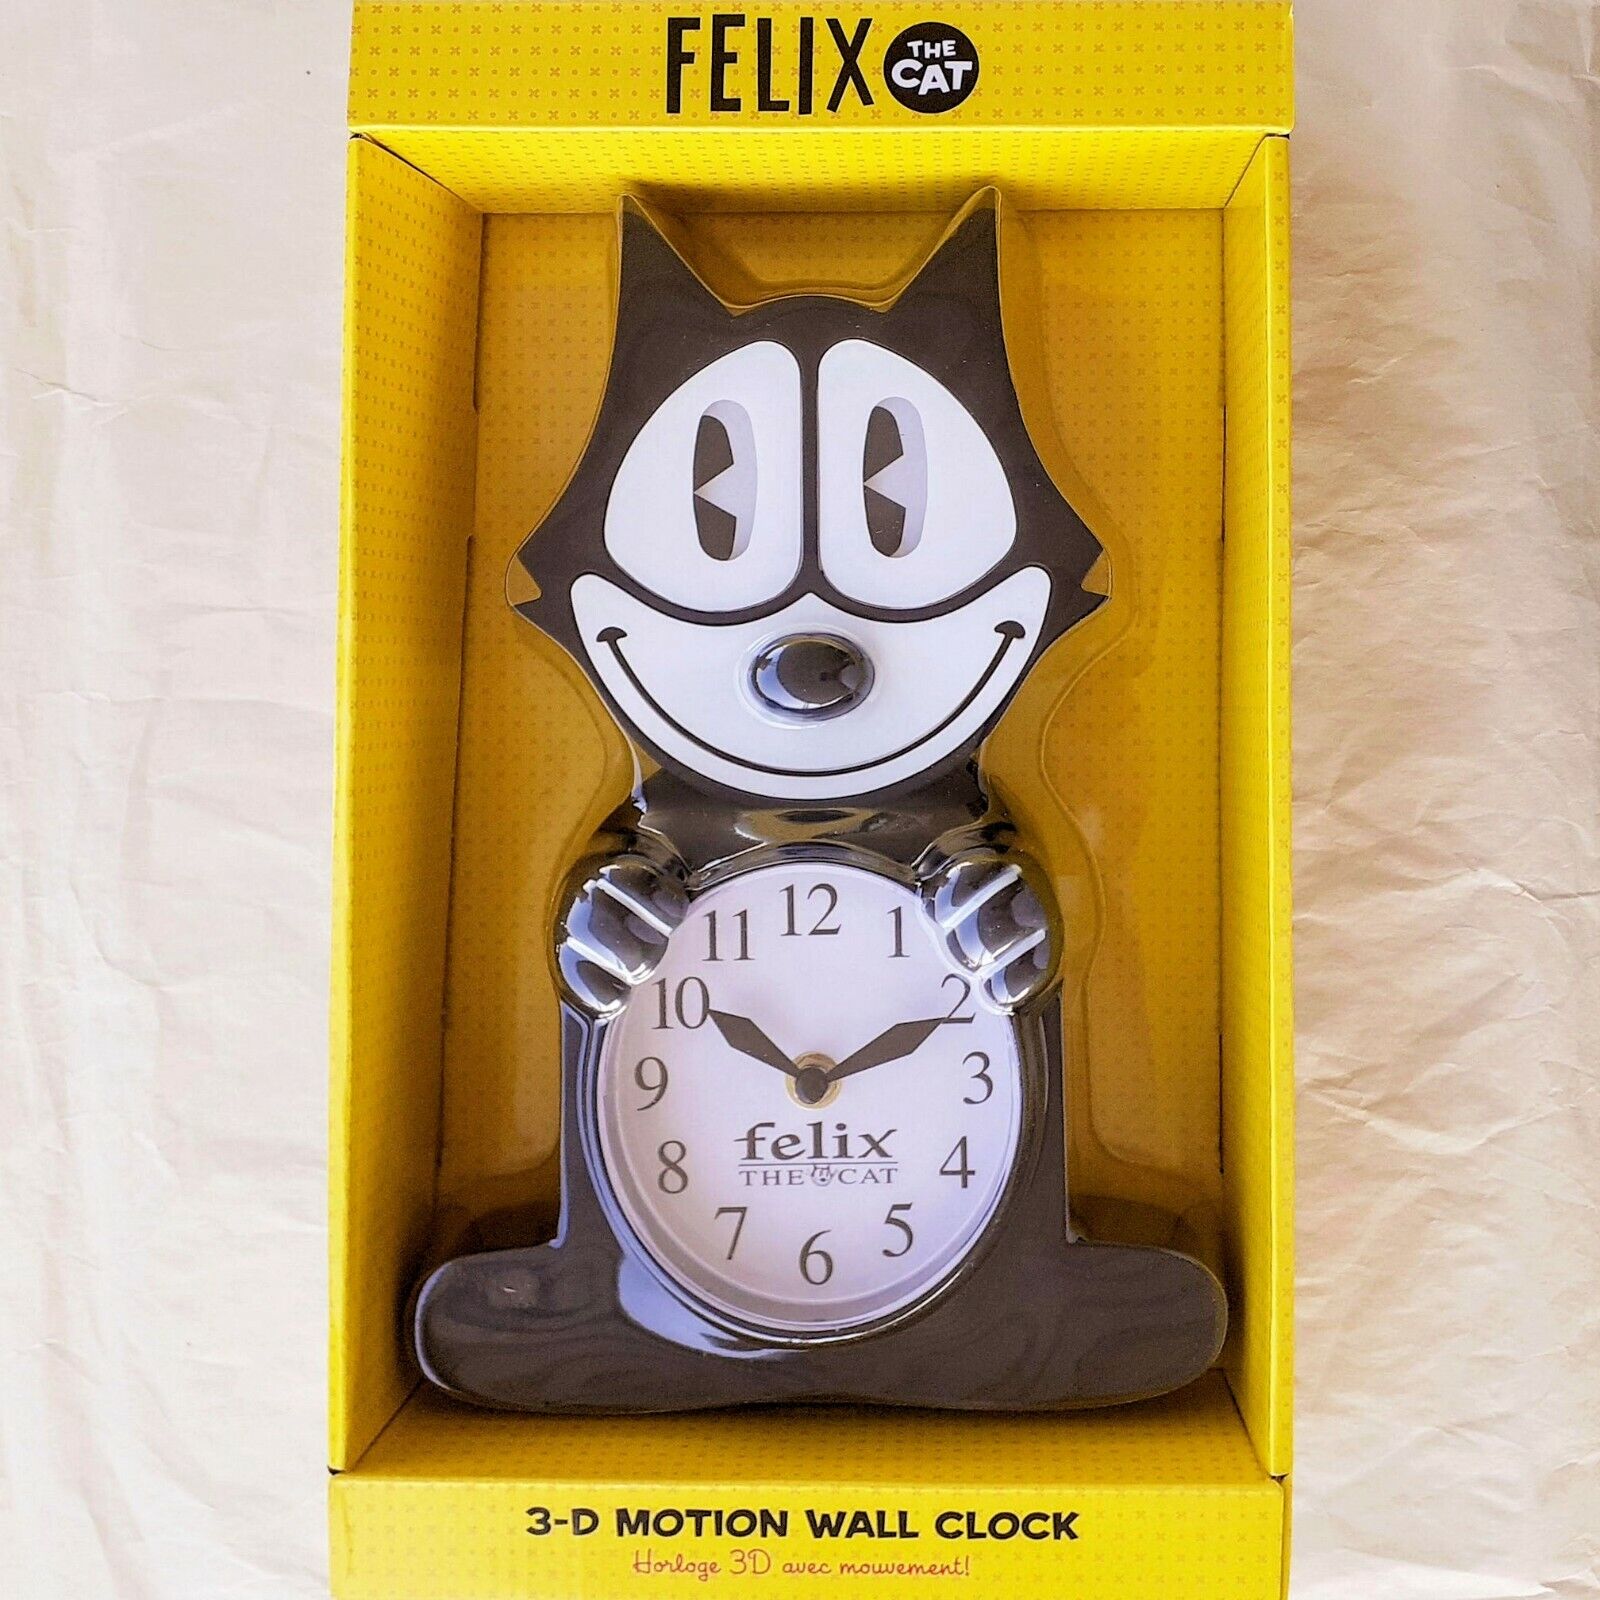 Felix the Cat 3D Motion Animated Clock with NJ Croce Certificate of Authenticity